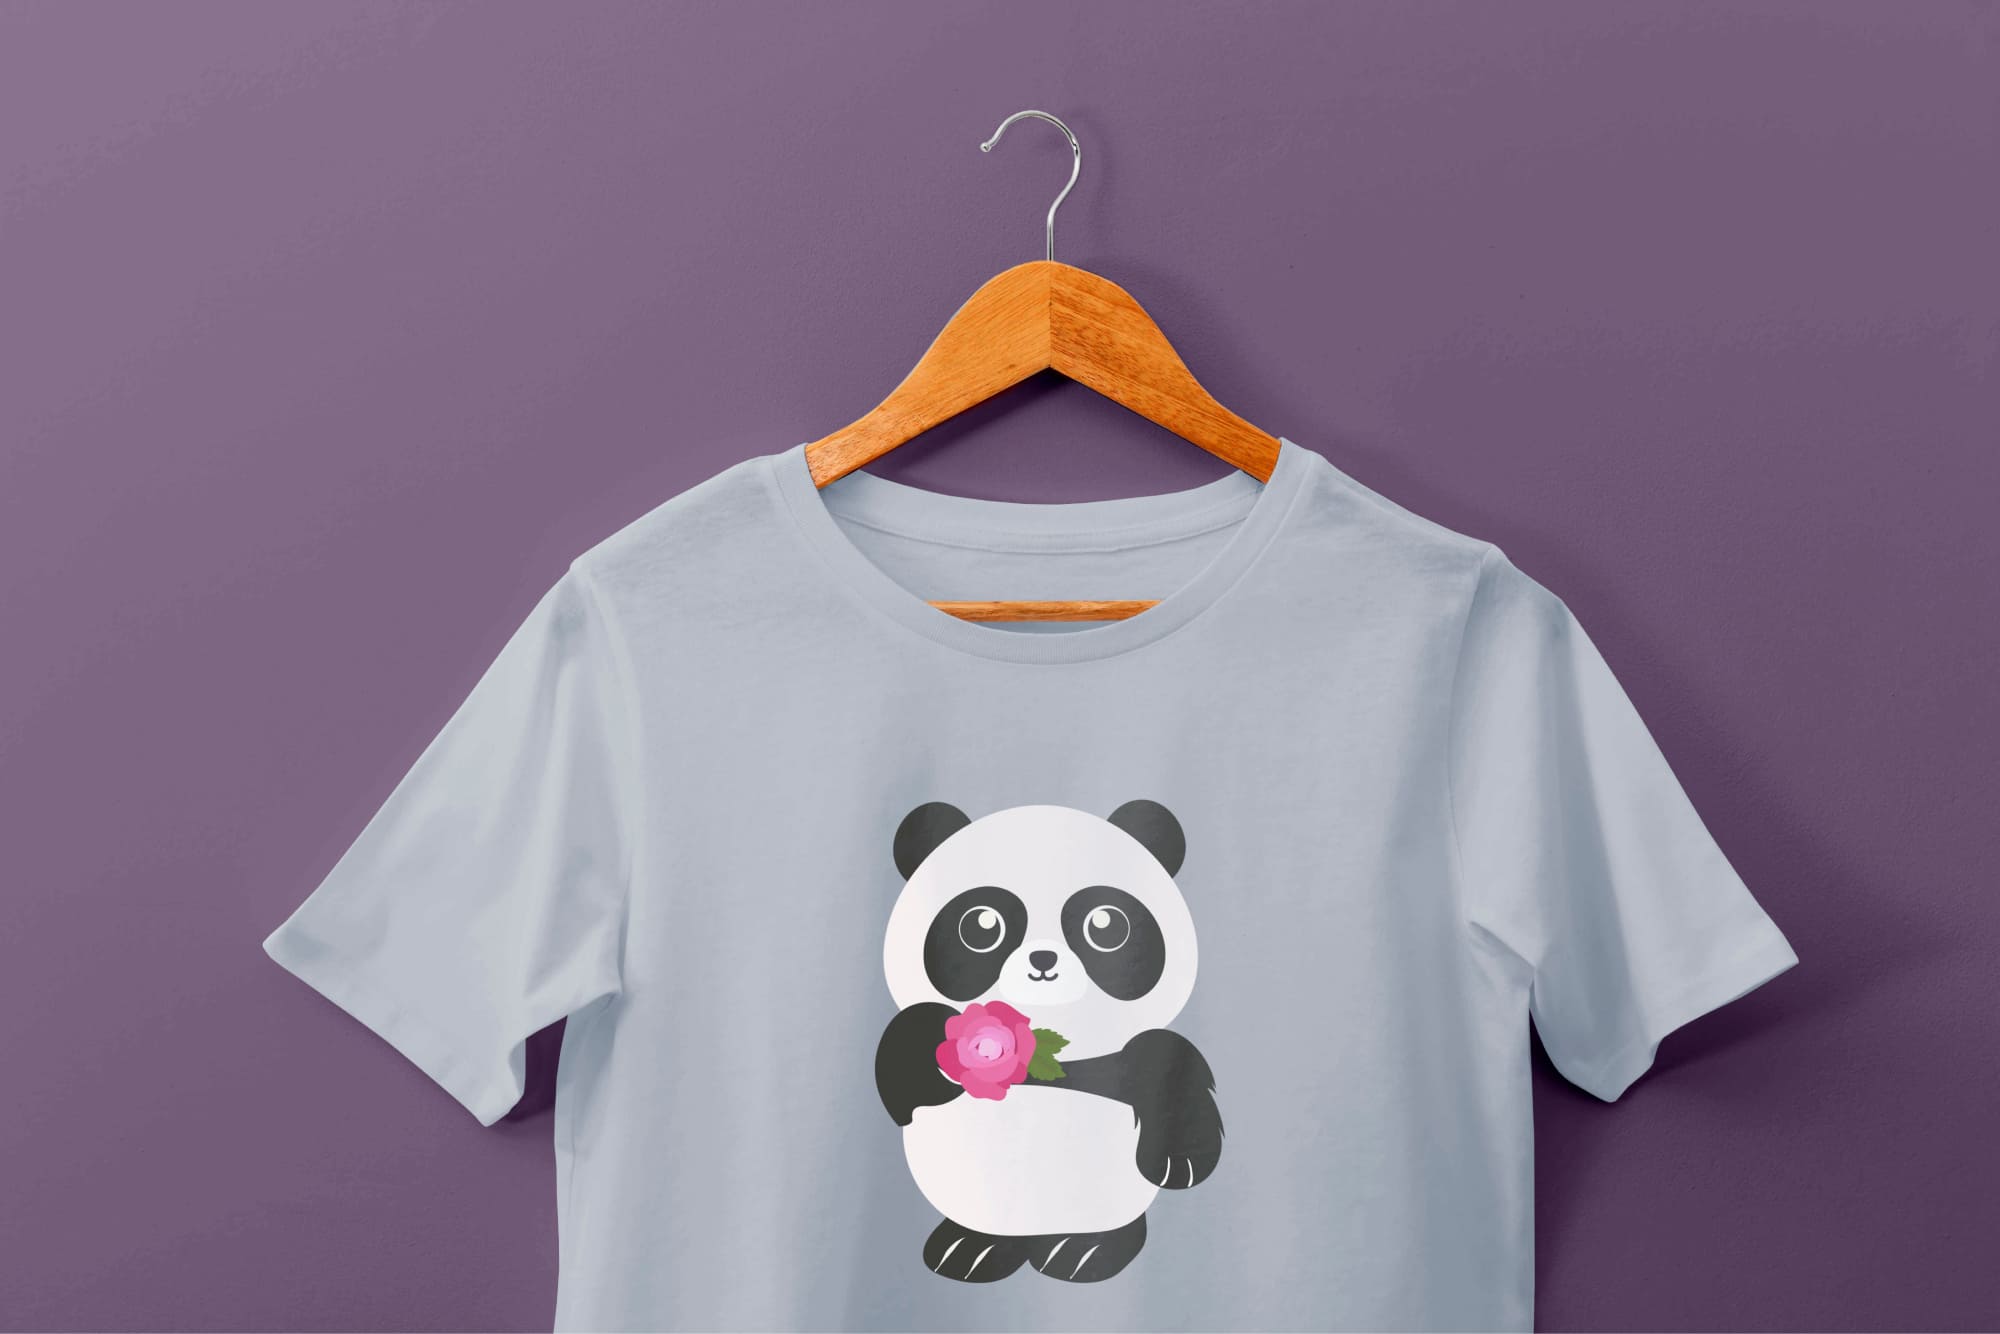 Light blue t-shirt with a panda and pink flower on a hanger on a purple background.